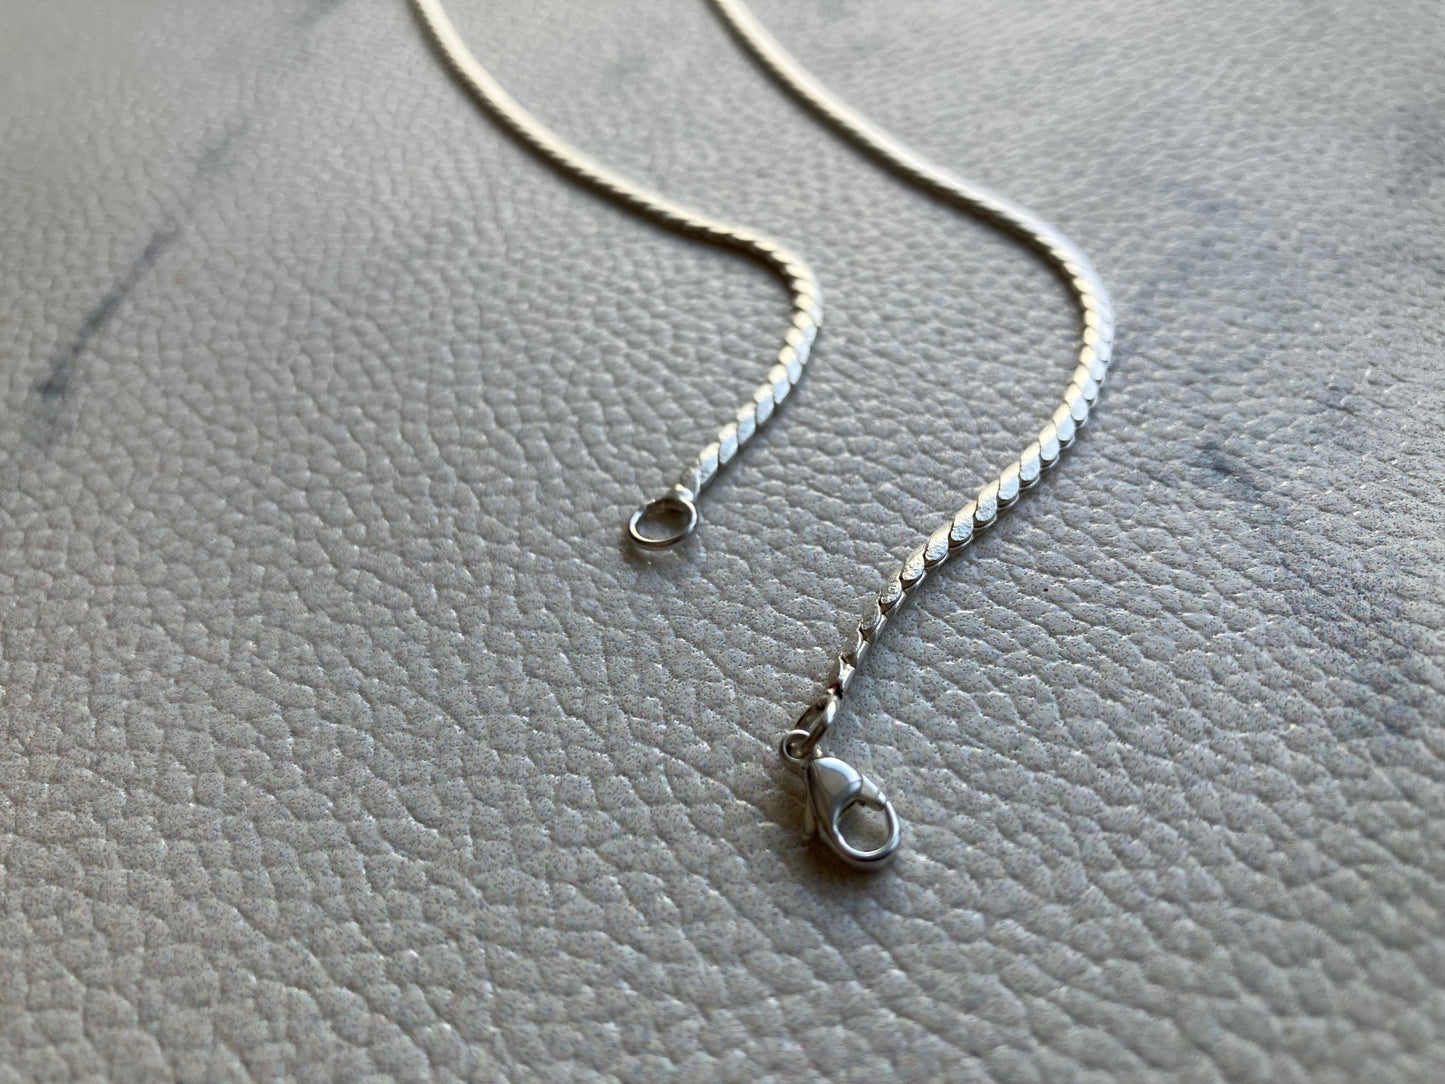 Sterling Silver925 Swage / Twist Chain Necklace / Choker For Men & Women スネーク スエッジ チェーンネックレス ユニセックス